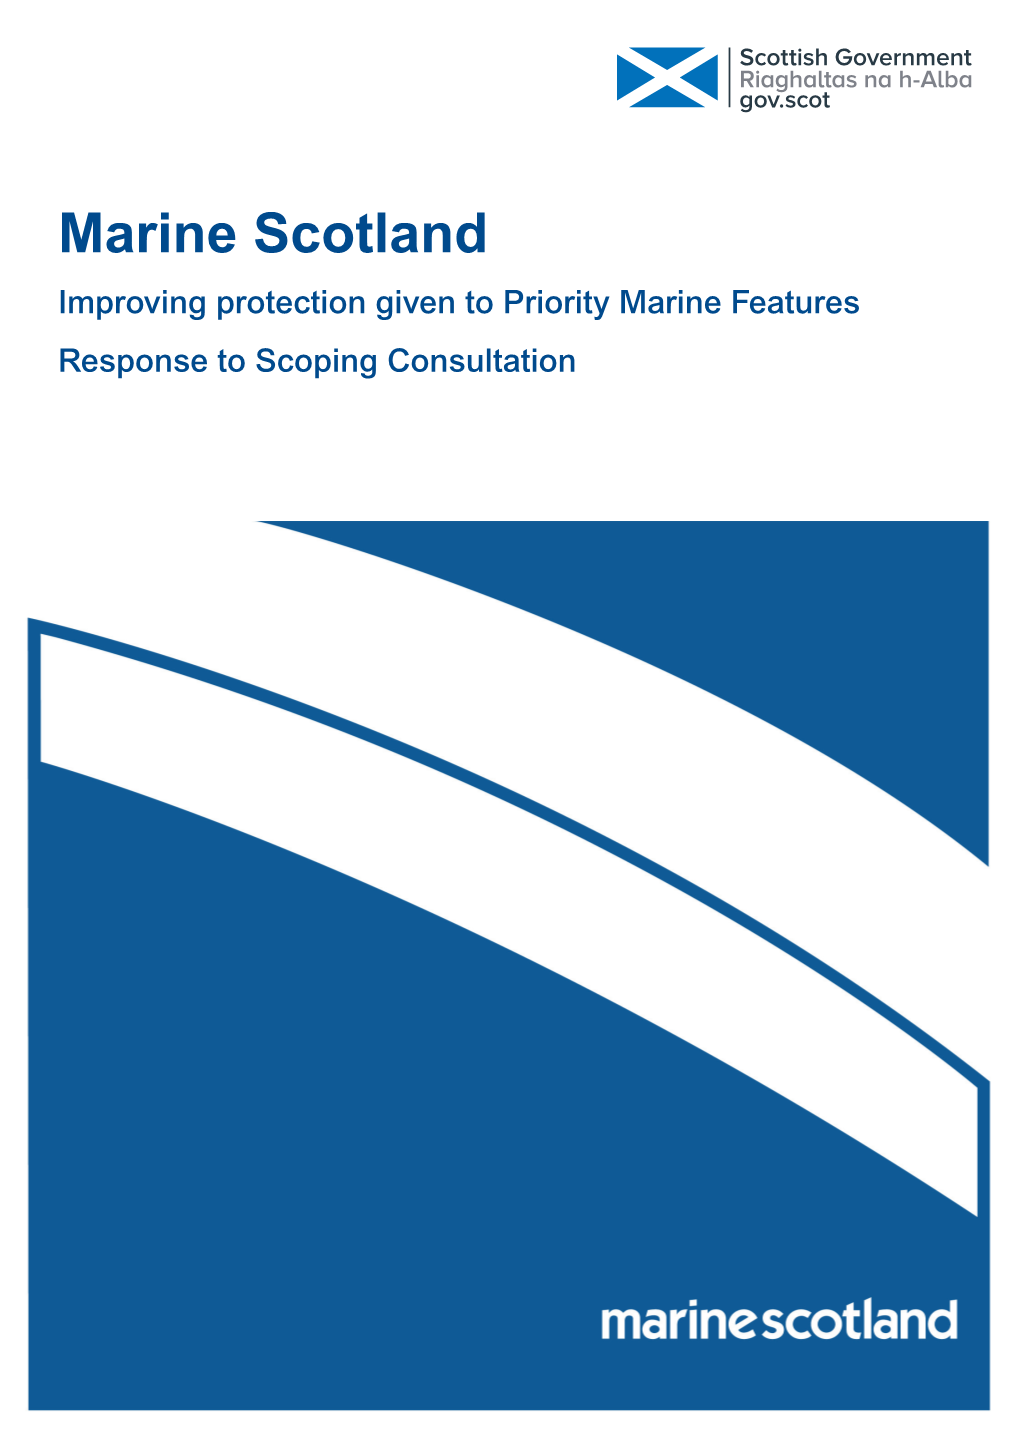 Marine Scotland Improvingconsultation Protection on the Allocation Given to Priority Marine Features of Scottish Fish Quotas Response to Scoping Consultation